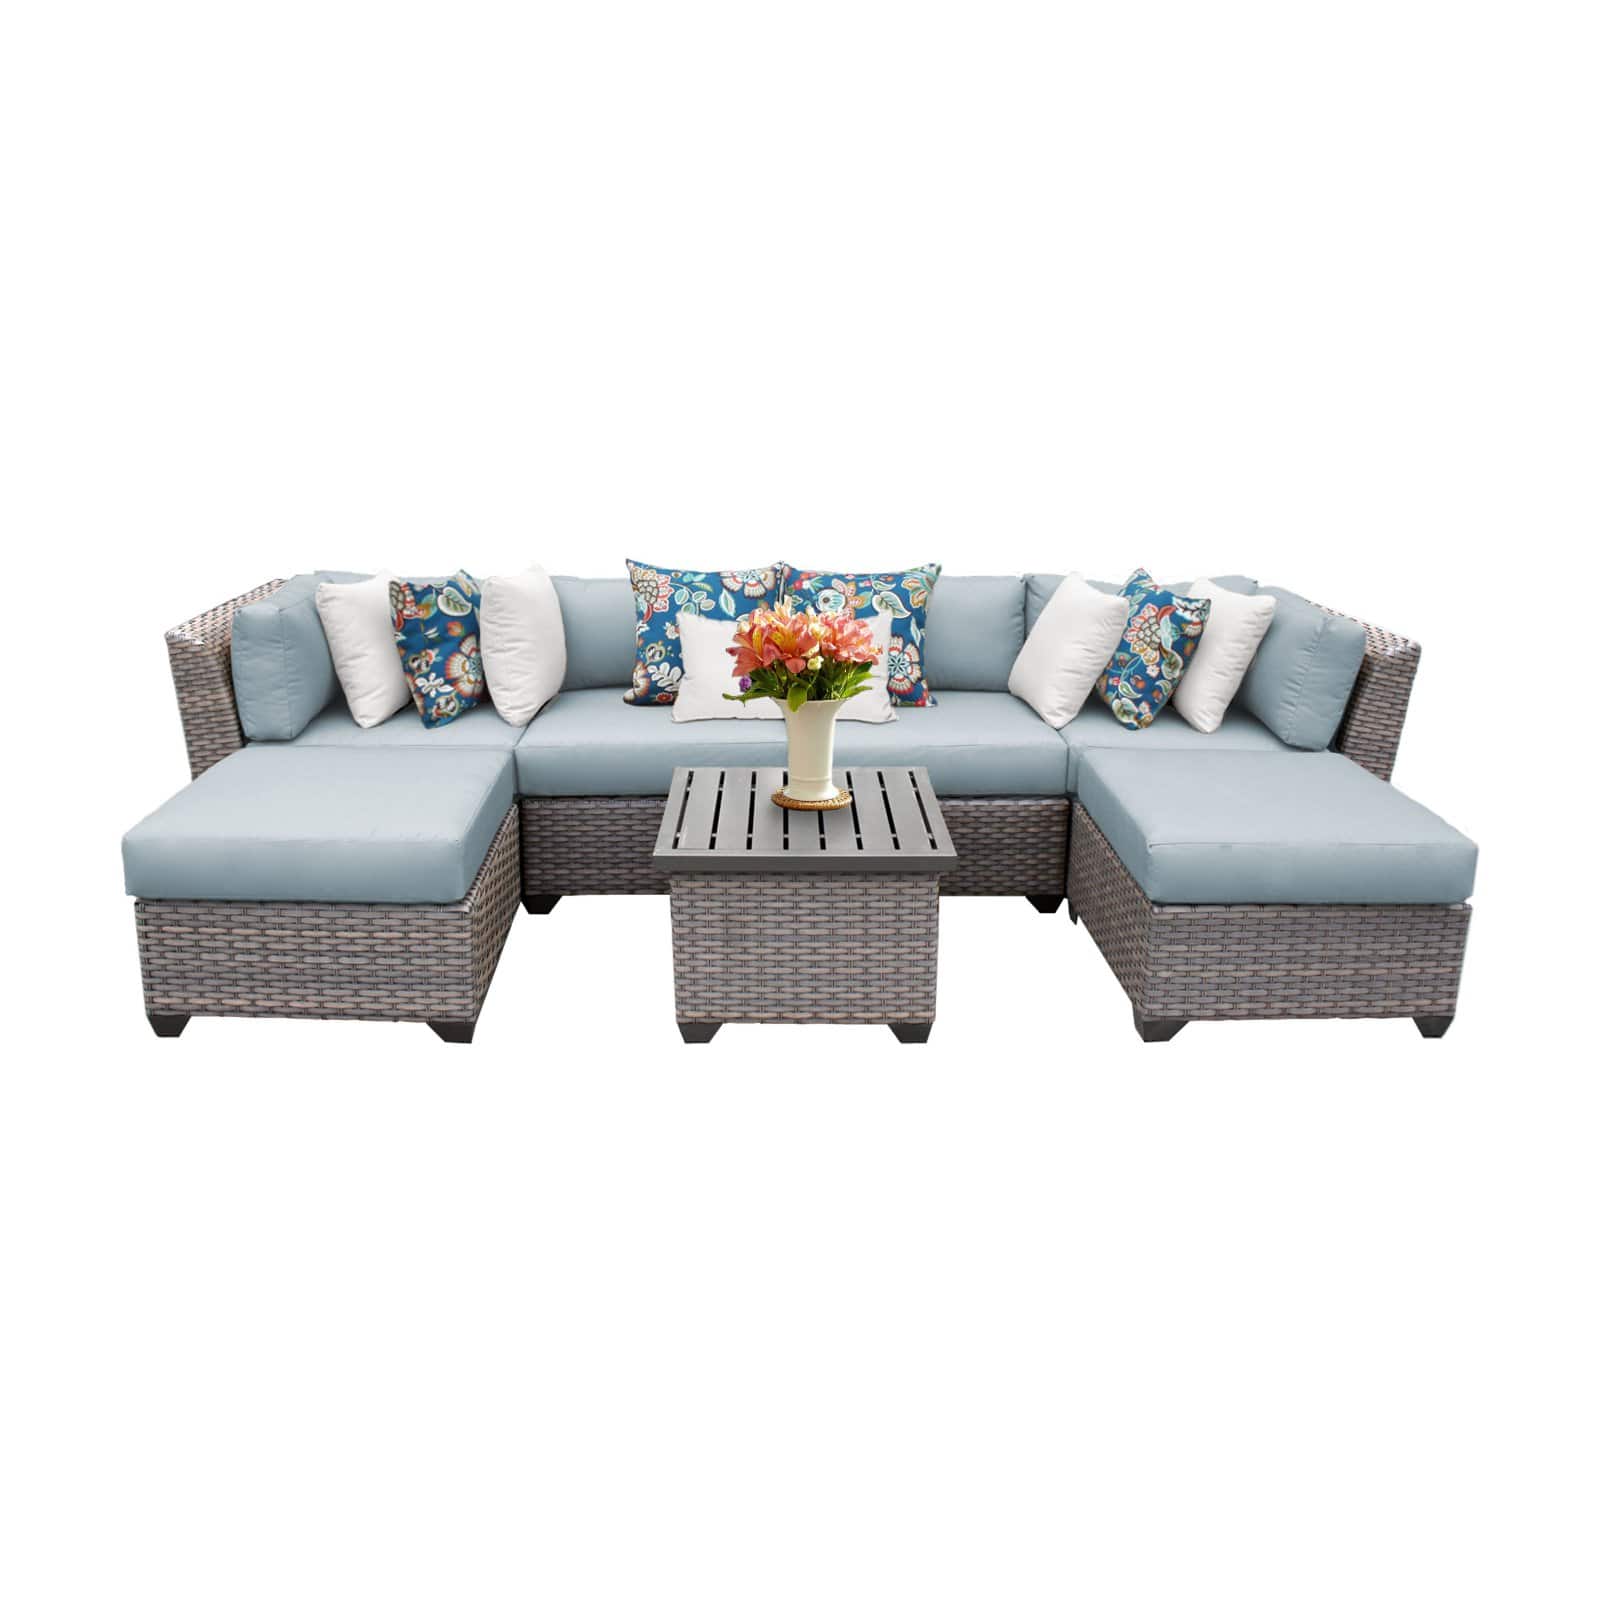 Florence 7 Piece Outdoor Wicker Patio Furniture Set 07a - image 2 of 2